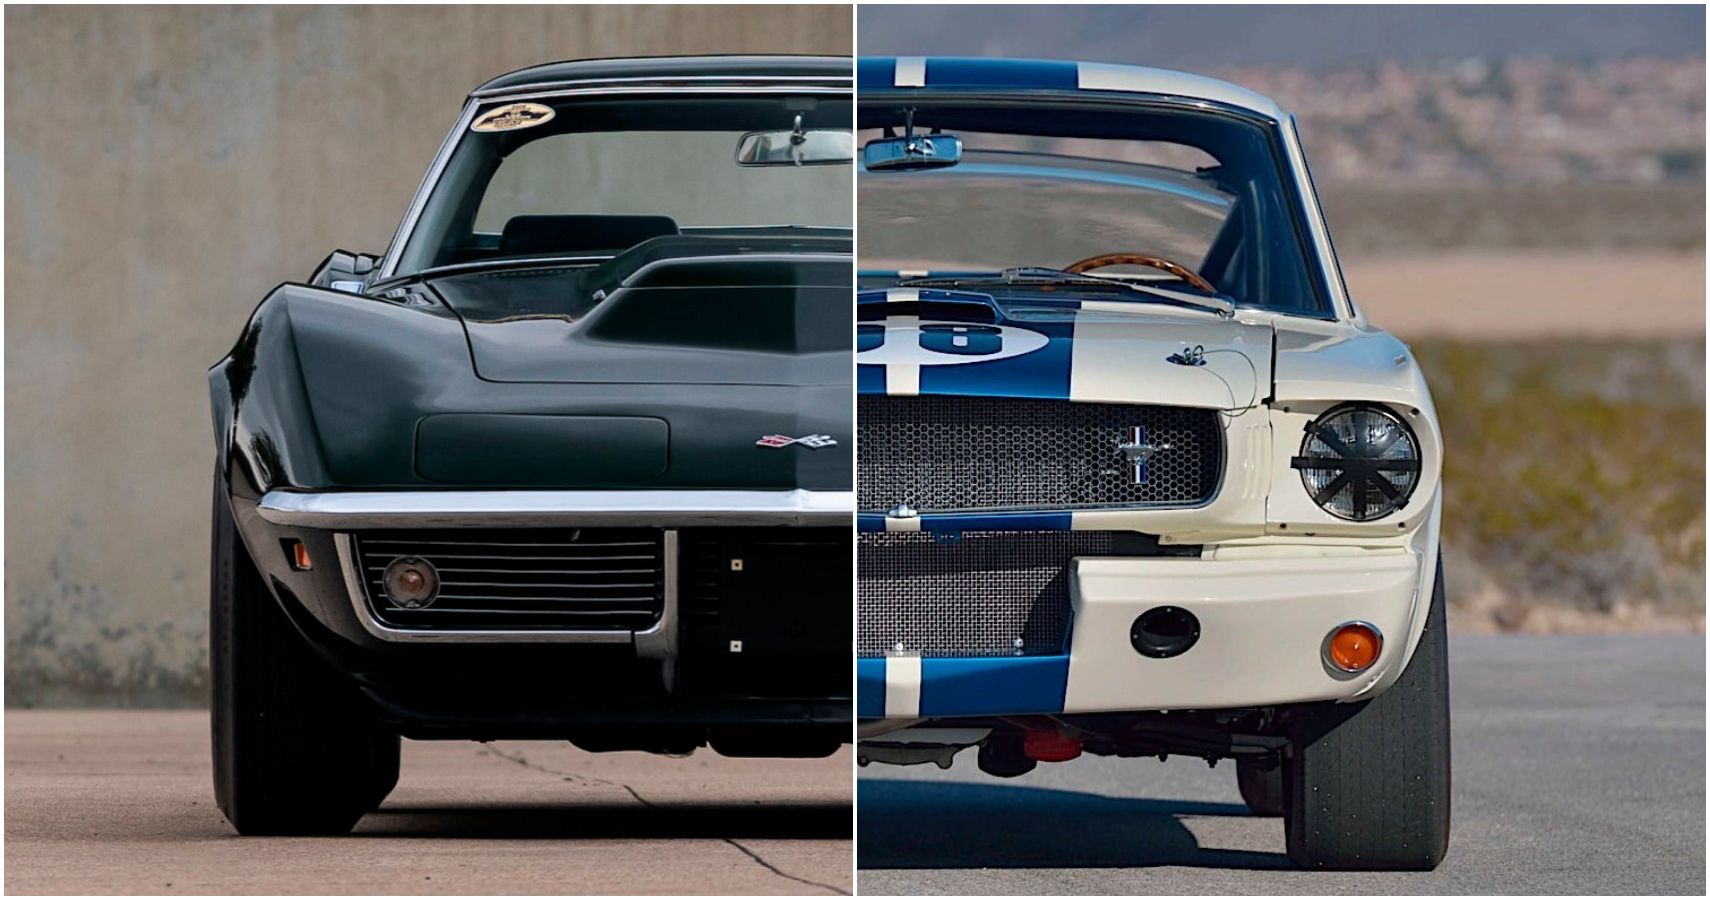 A Collage Of A 1965 Shelby Mustang GT350 And A 1968 Chevrolet Corvette L88 